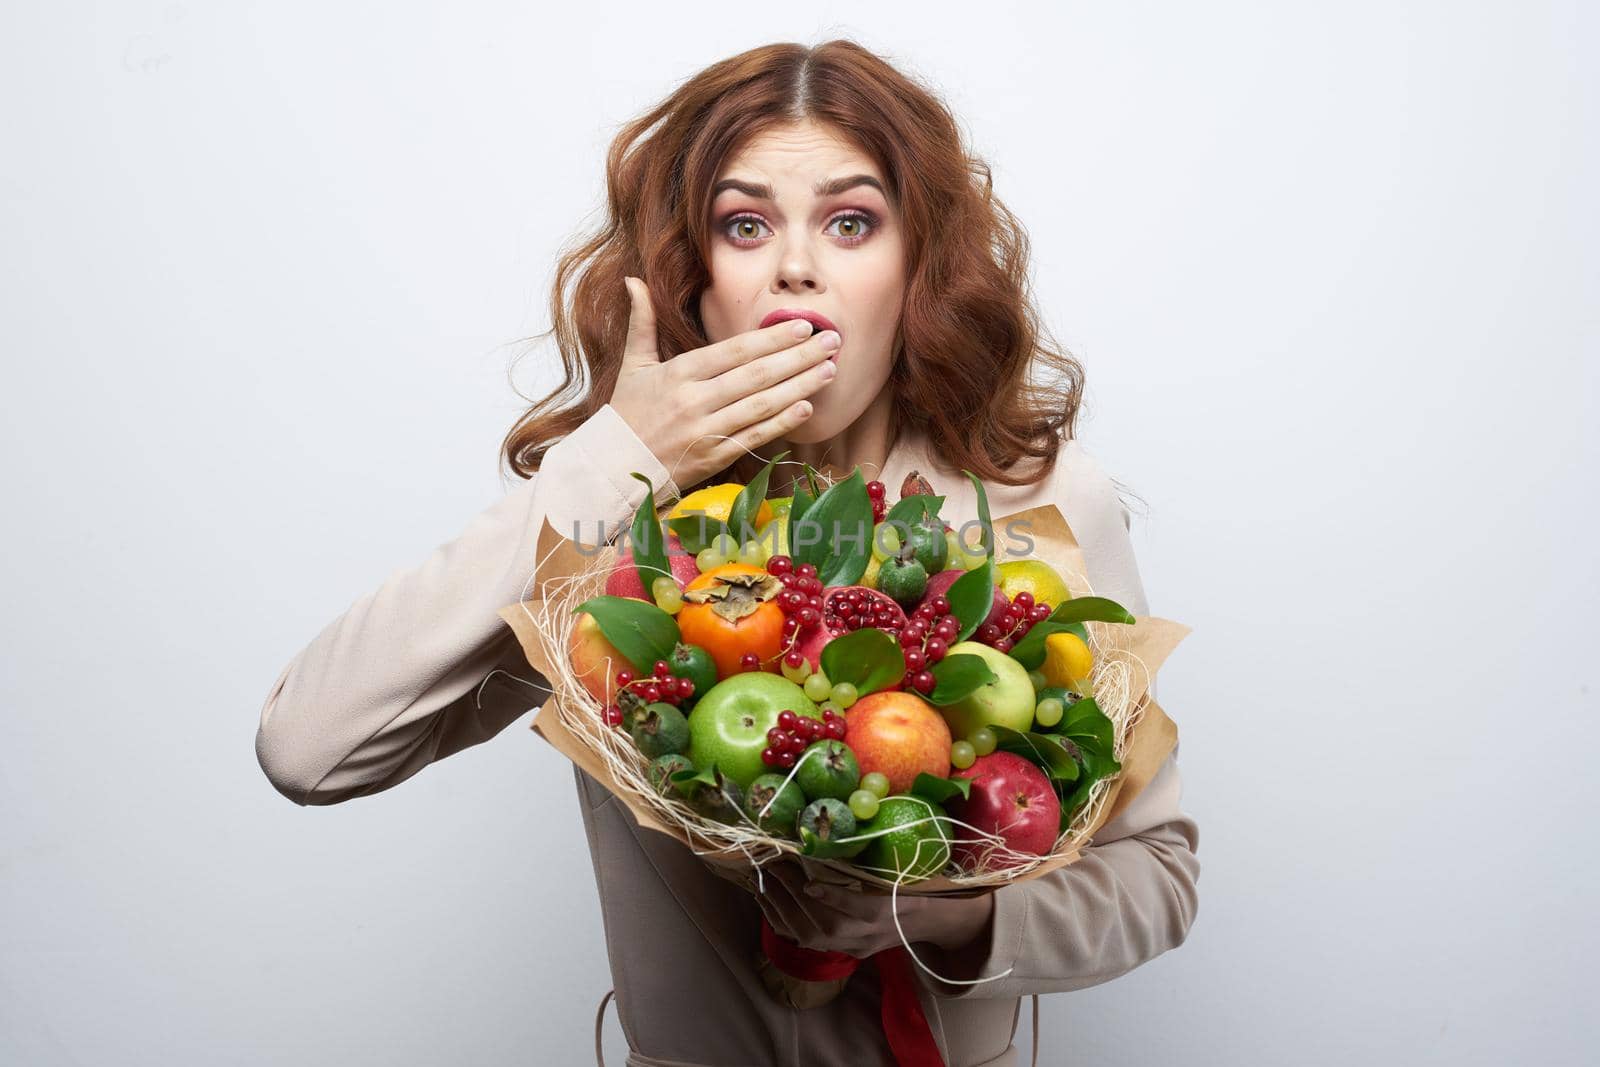 cheerful woman smile posing fresh fruits bouquet emotions light background by Vichizh